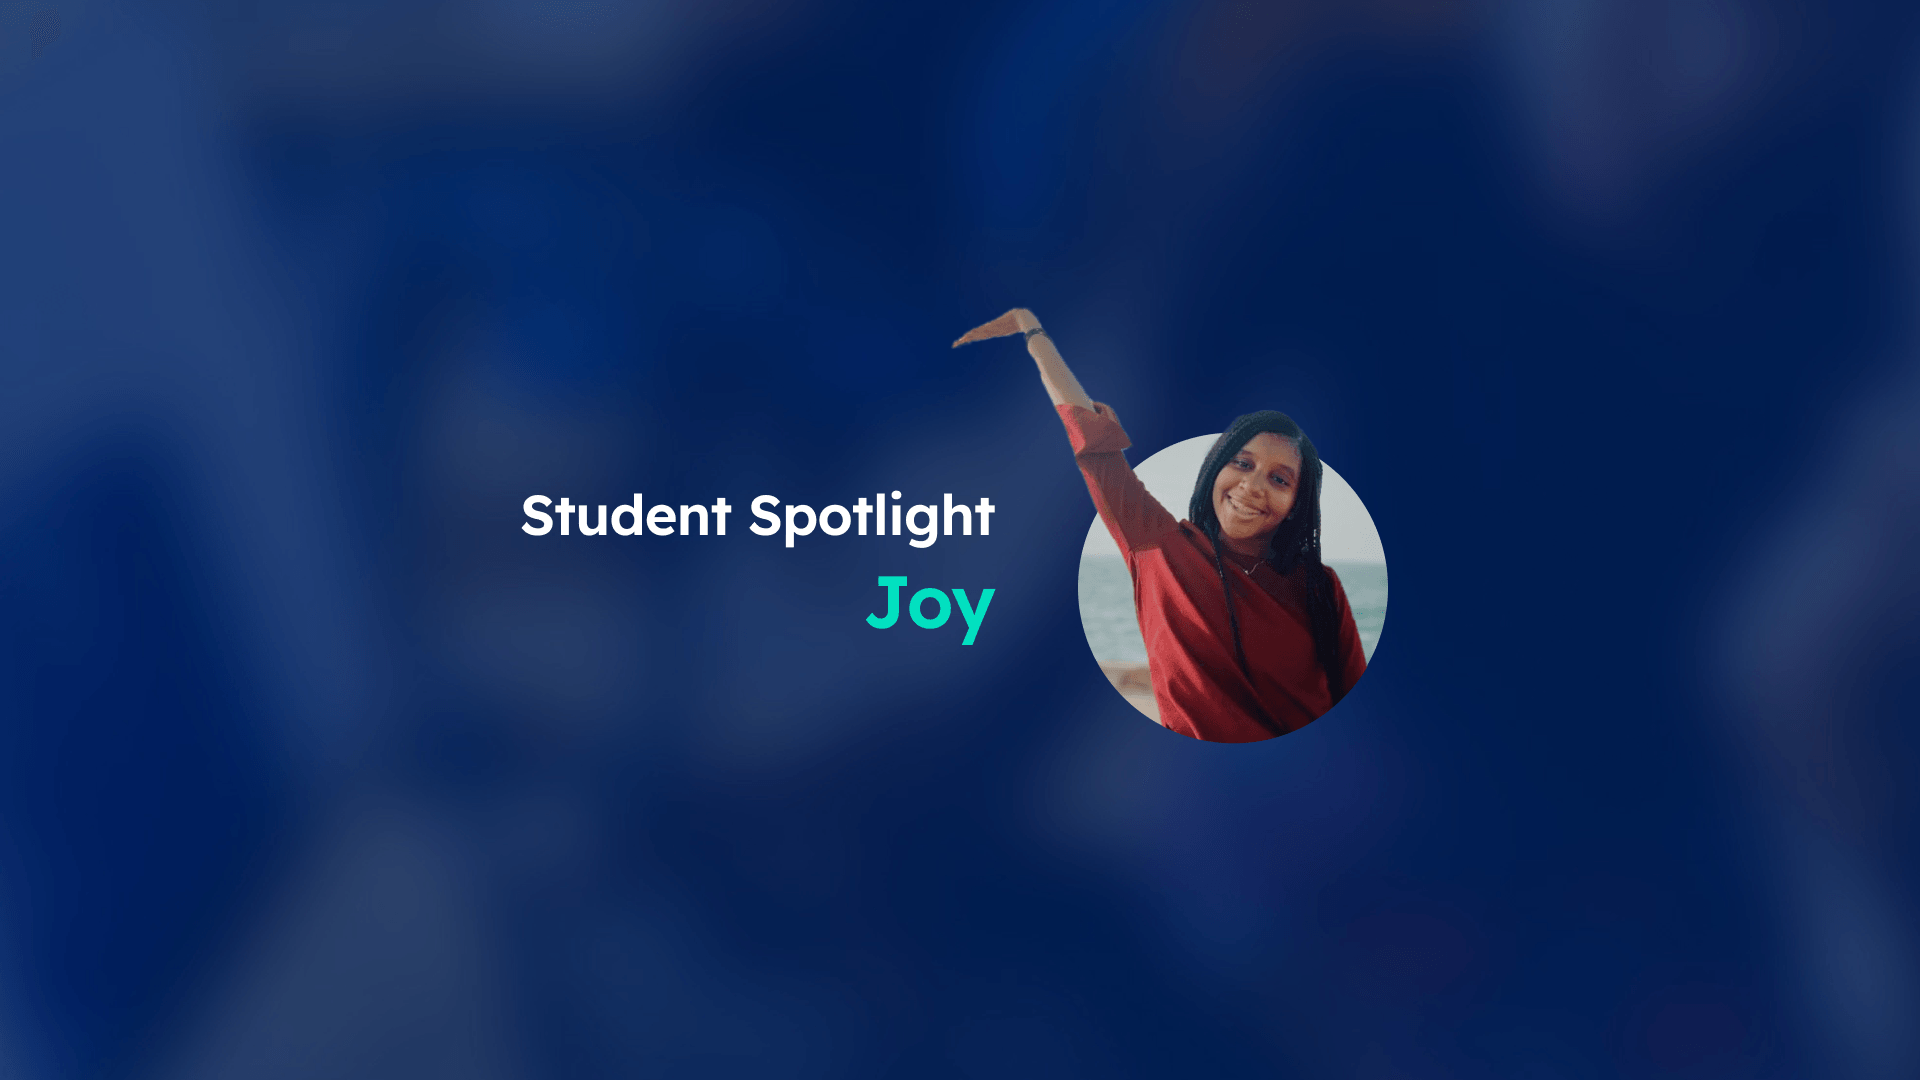 navy blue background with text "student spotlight joy" next to a photo of a black female student in a red shirt raising her arm